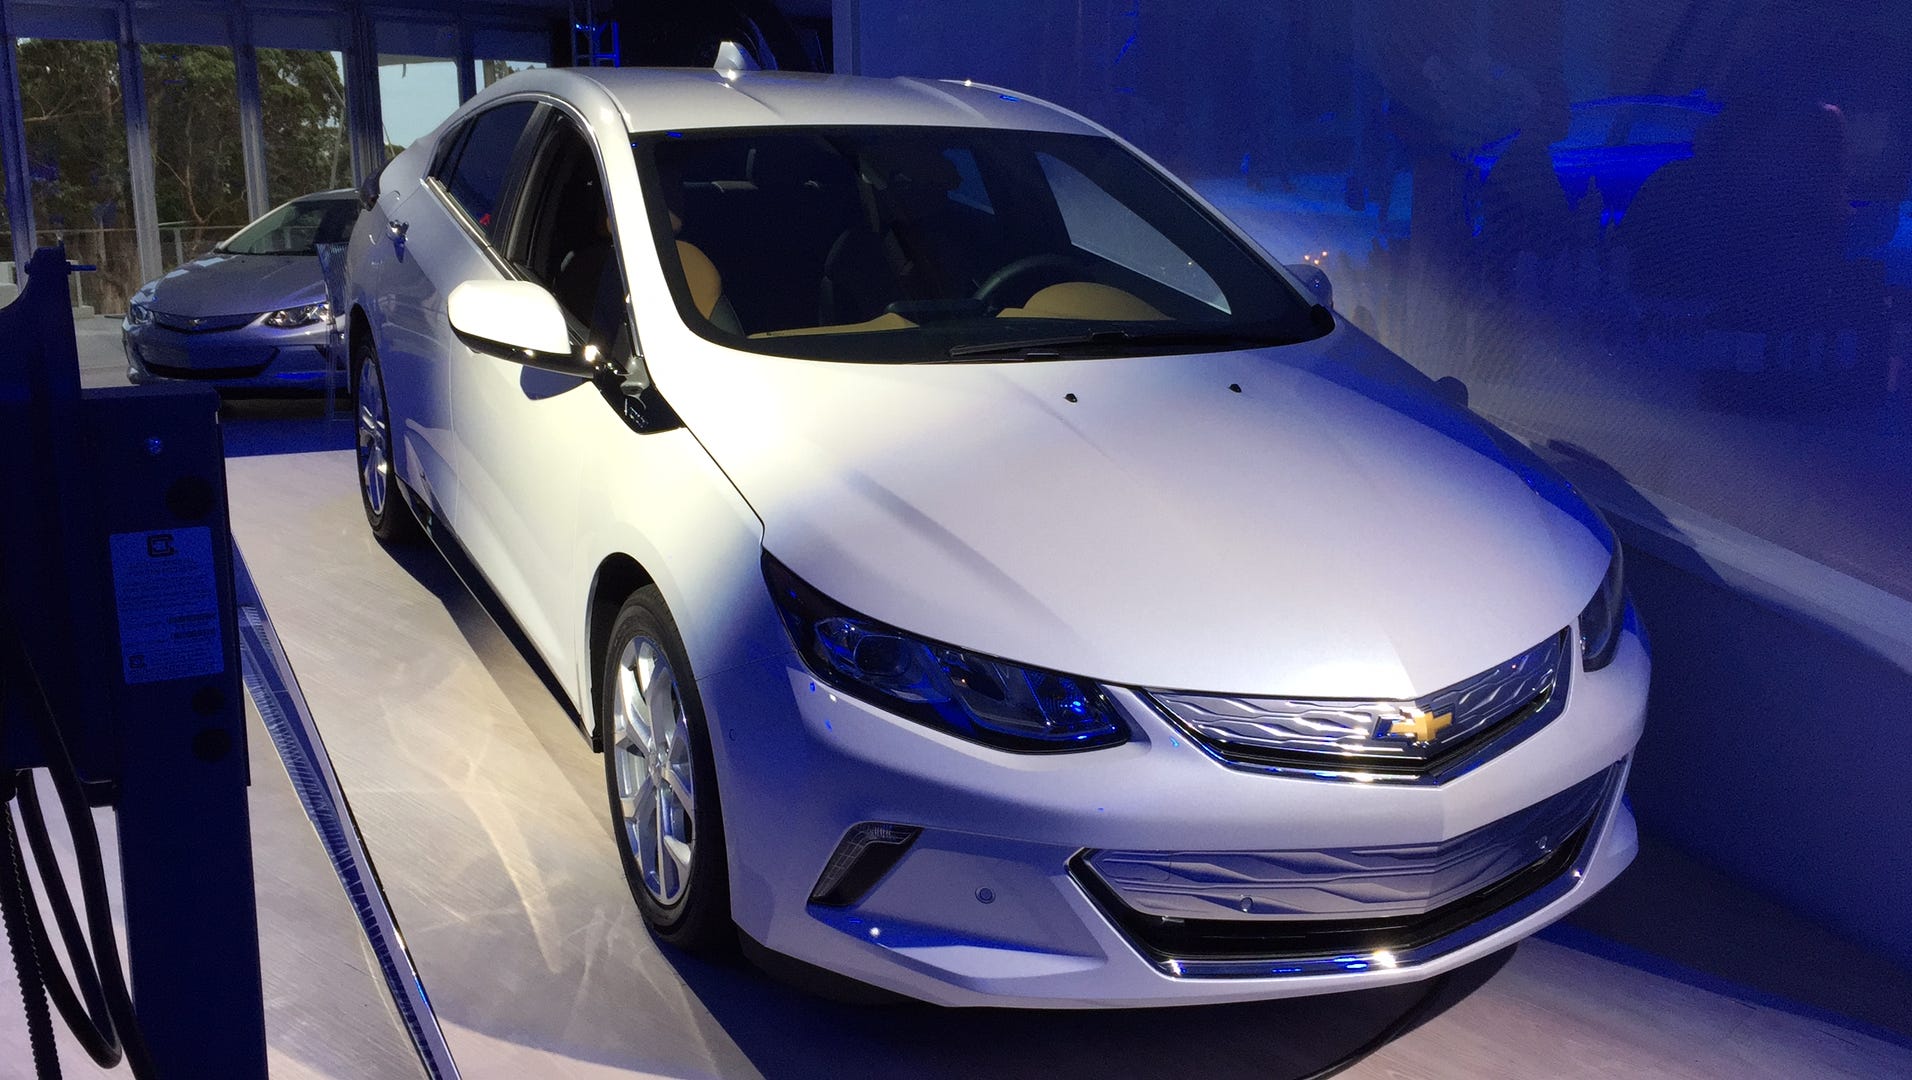 First drive: 2016 Chevrolet Volt adds range, features